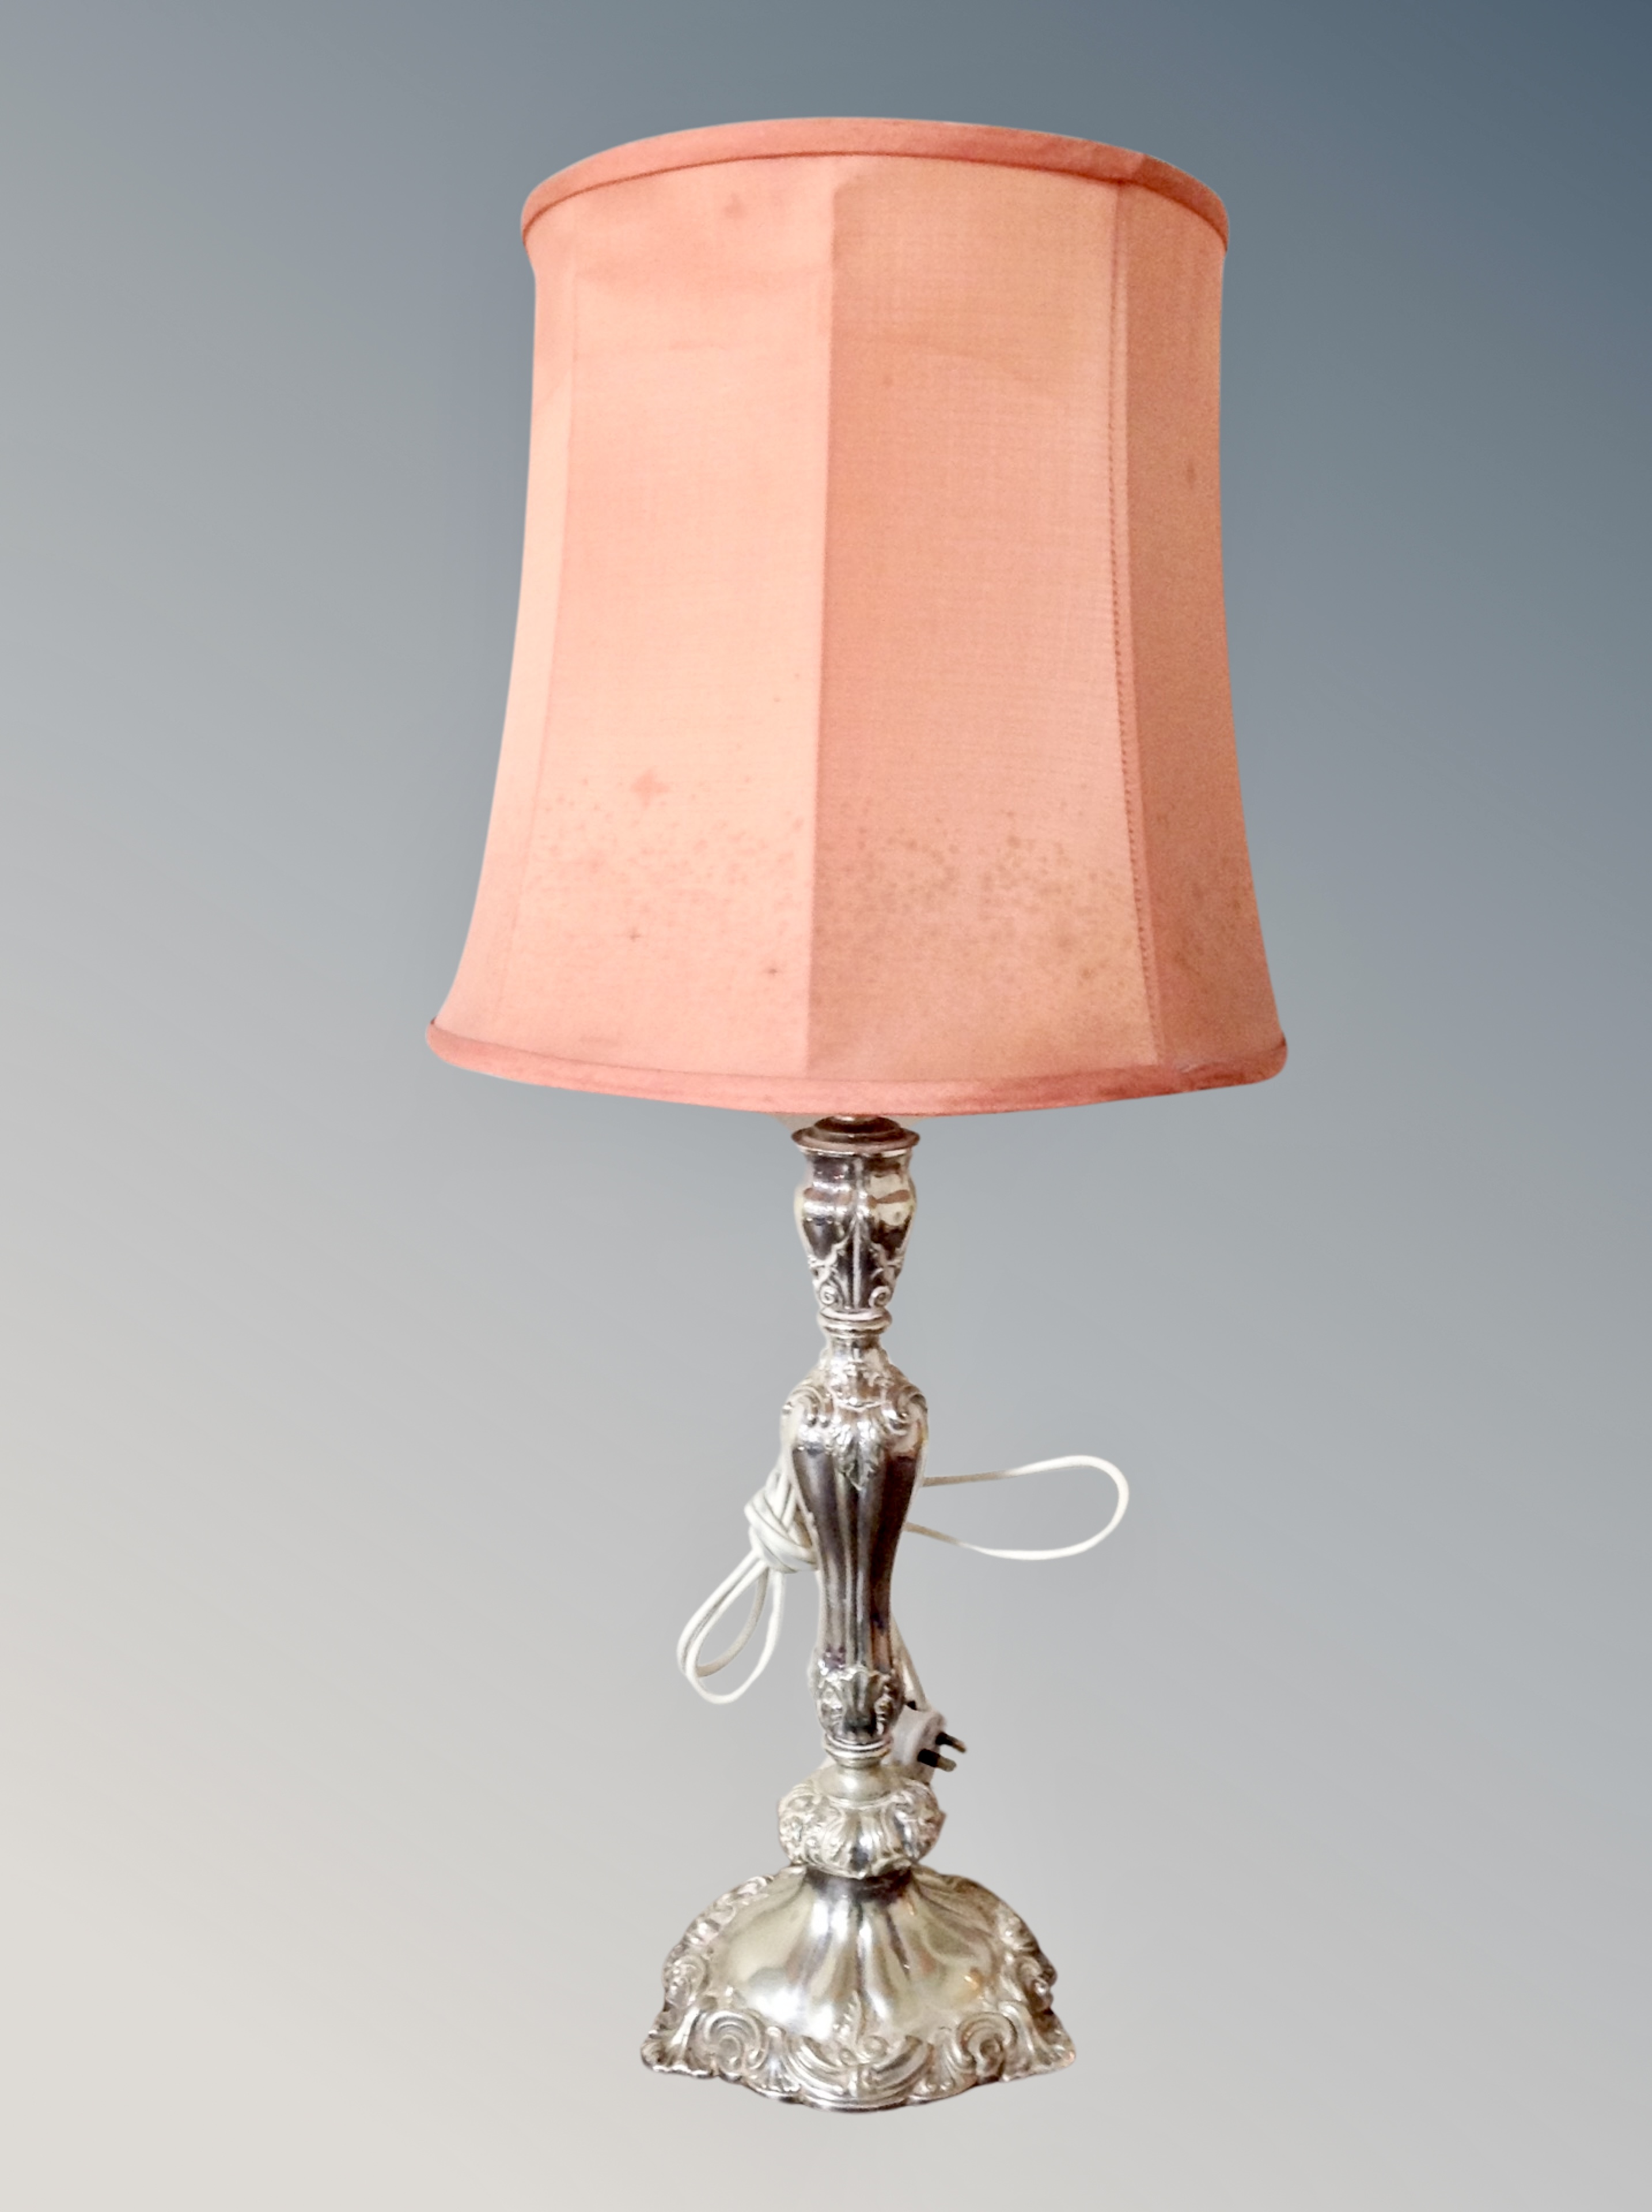 An ornate silver plated table lamp with shade,